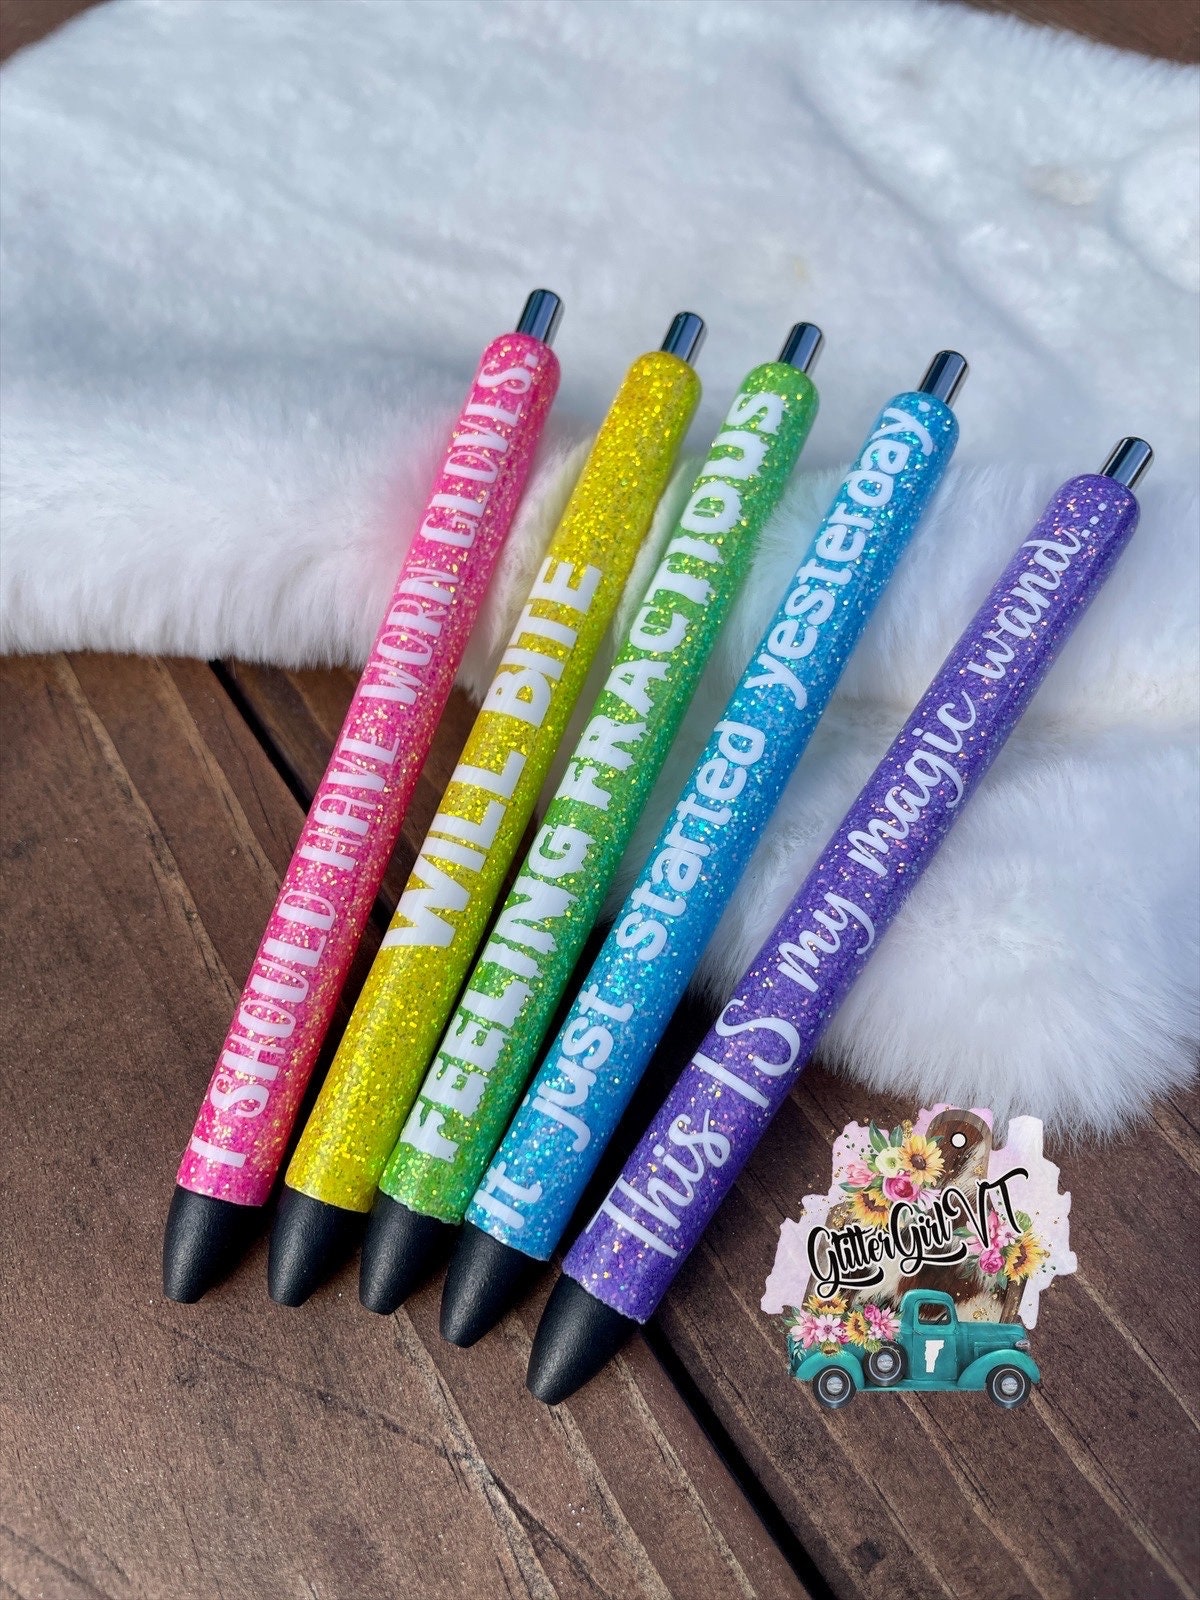 Planet Pens Dogs Novelty Pen Bundle 8 Pc Set - Unique Kids and Adults  Office Supplies Ballpoint Pen, Colorful Dogs Writing Pen for School and  Office 